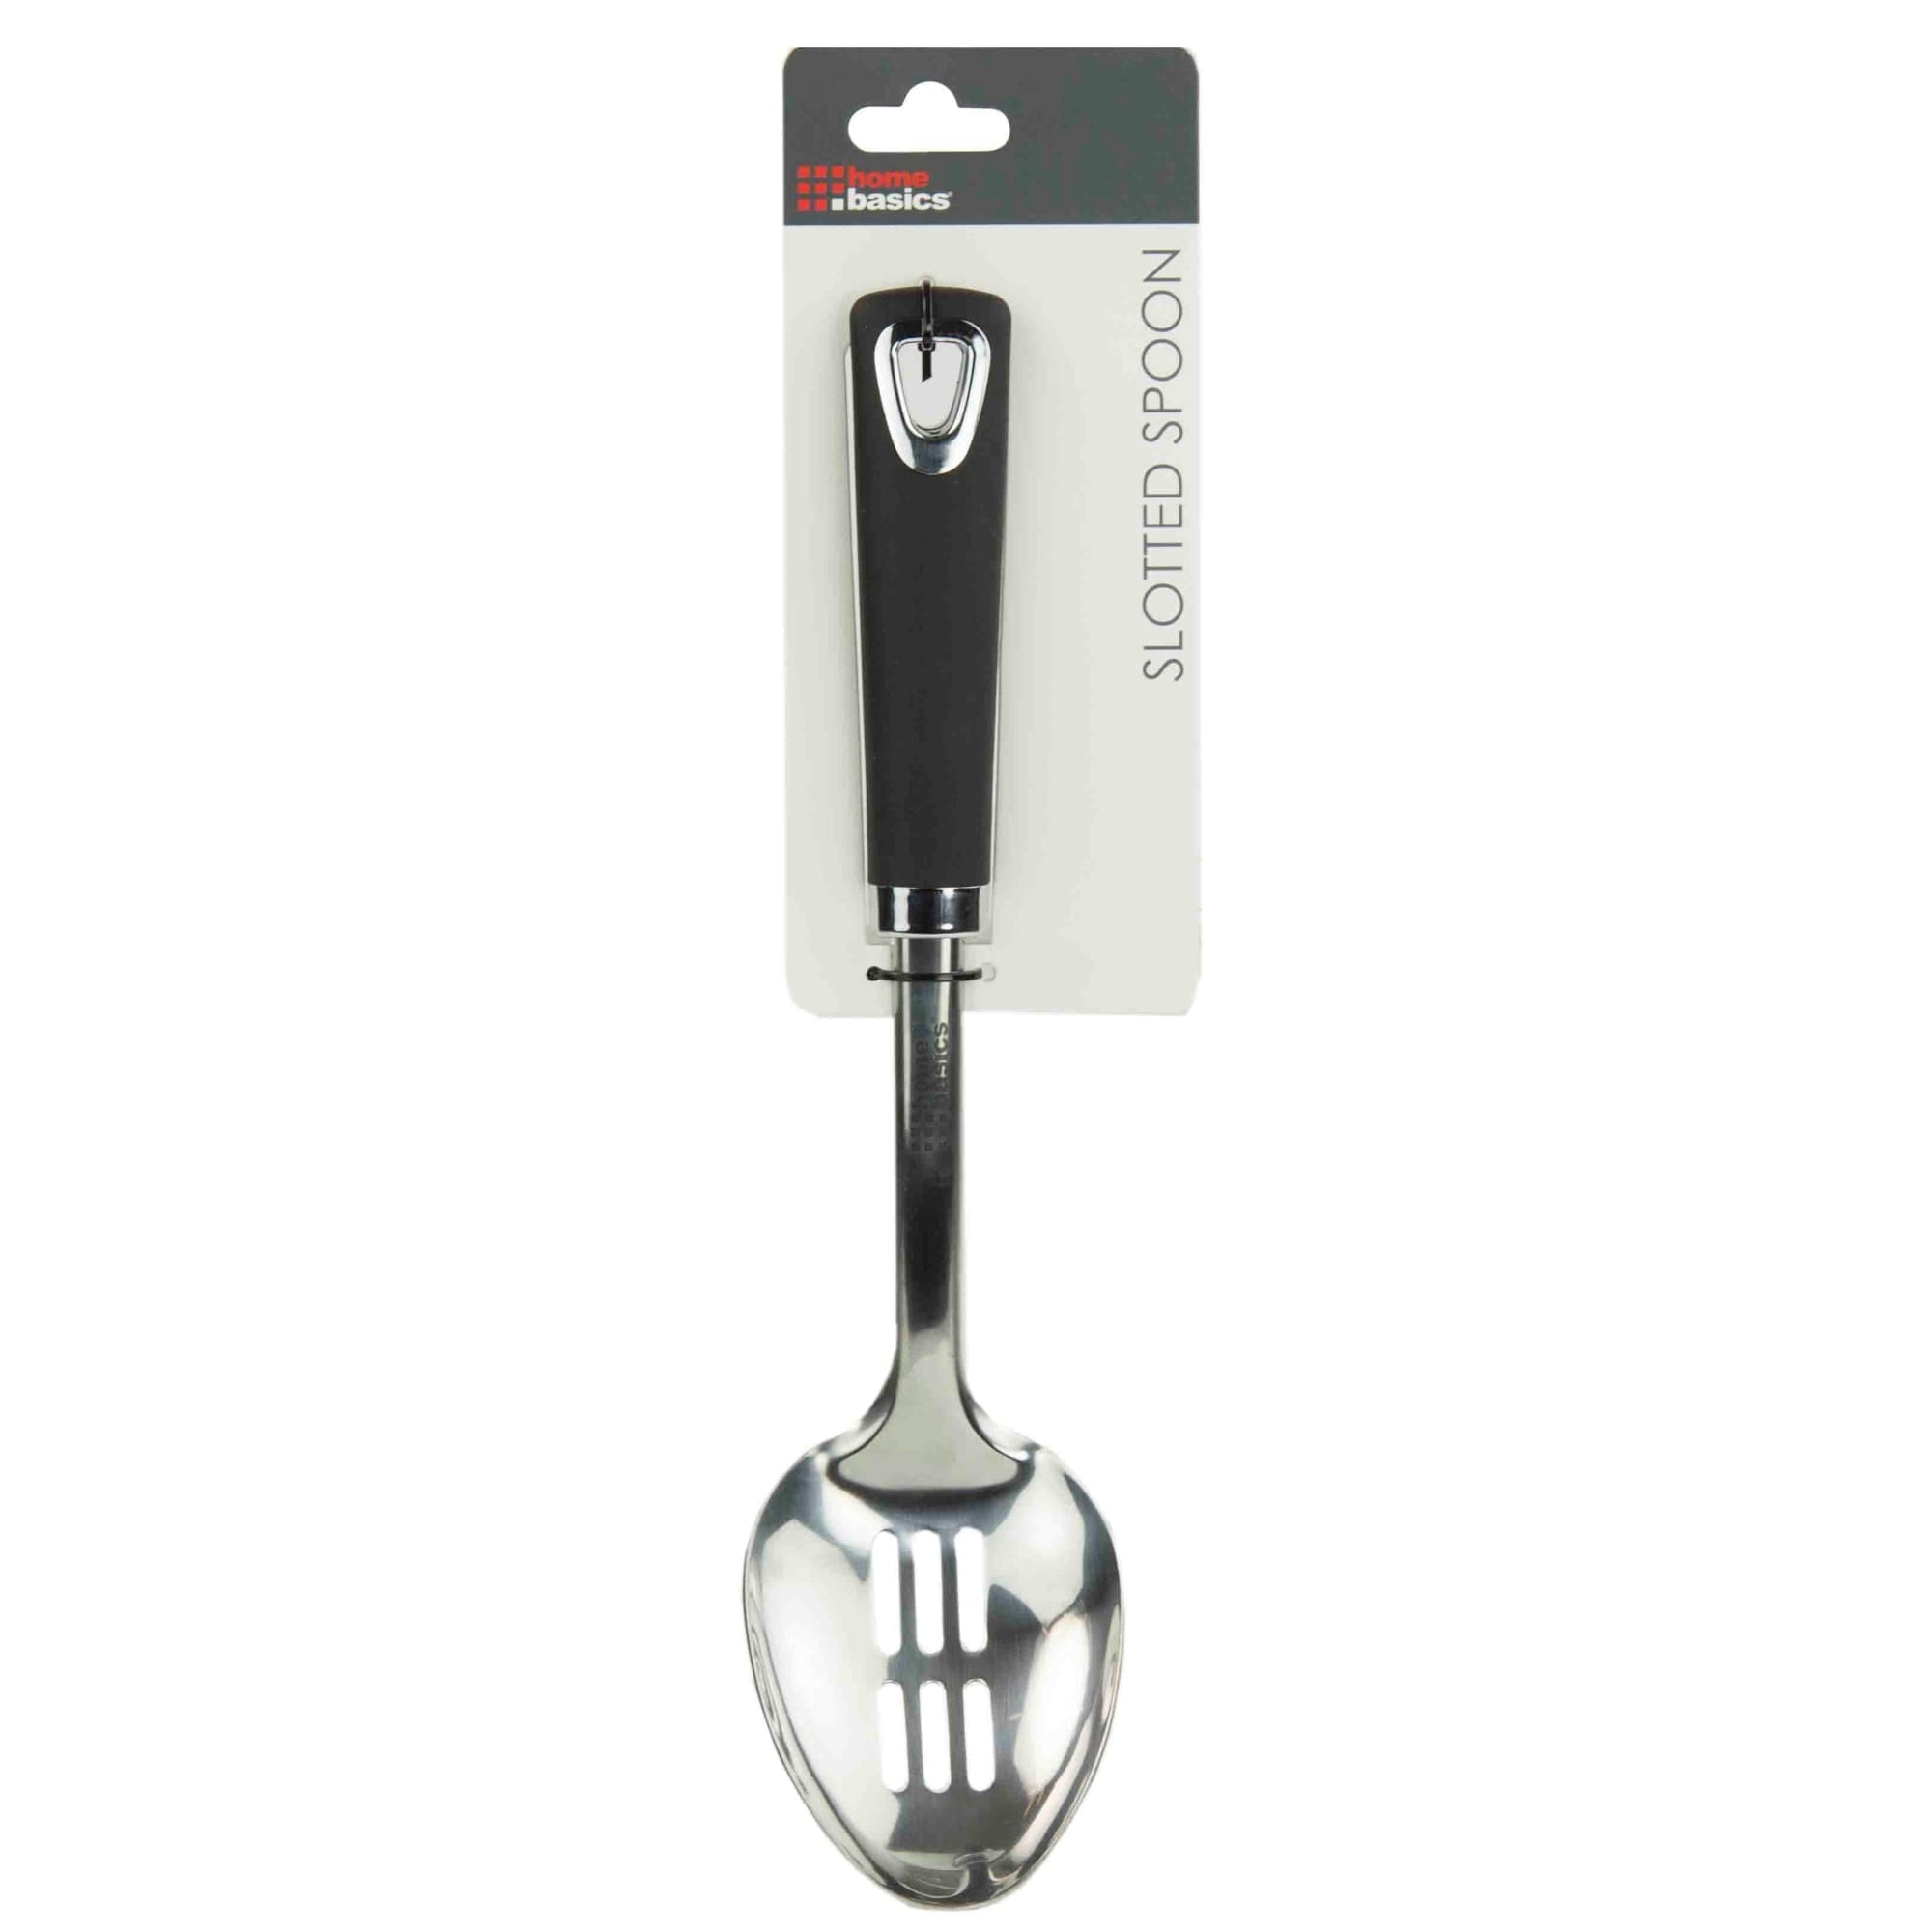 Home Basics Stainless Steel Aster Slotted Spoon $3.00 EACH, CASE PACK OF 24